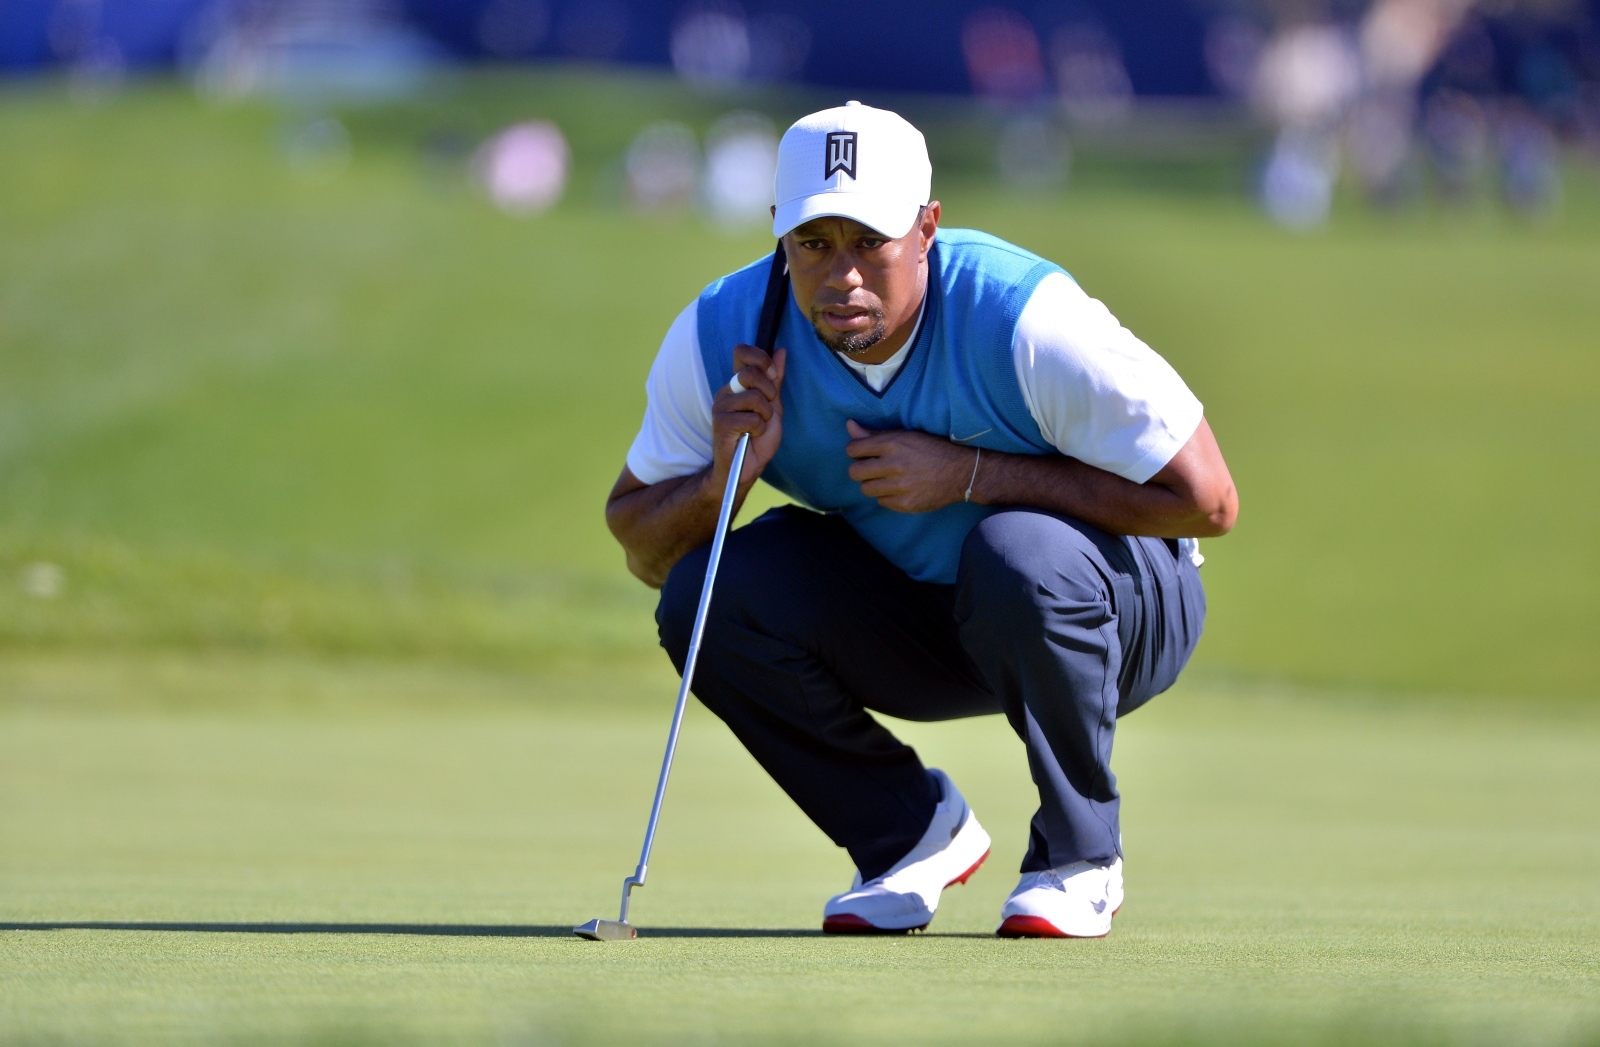 'The back is progressing': Tiger Woods offers latest injury update after missing Masters